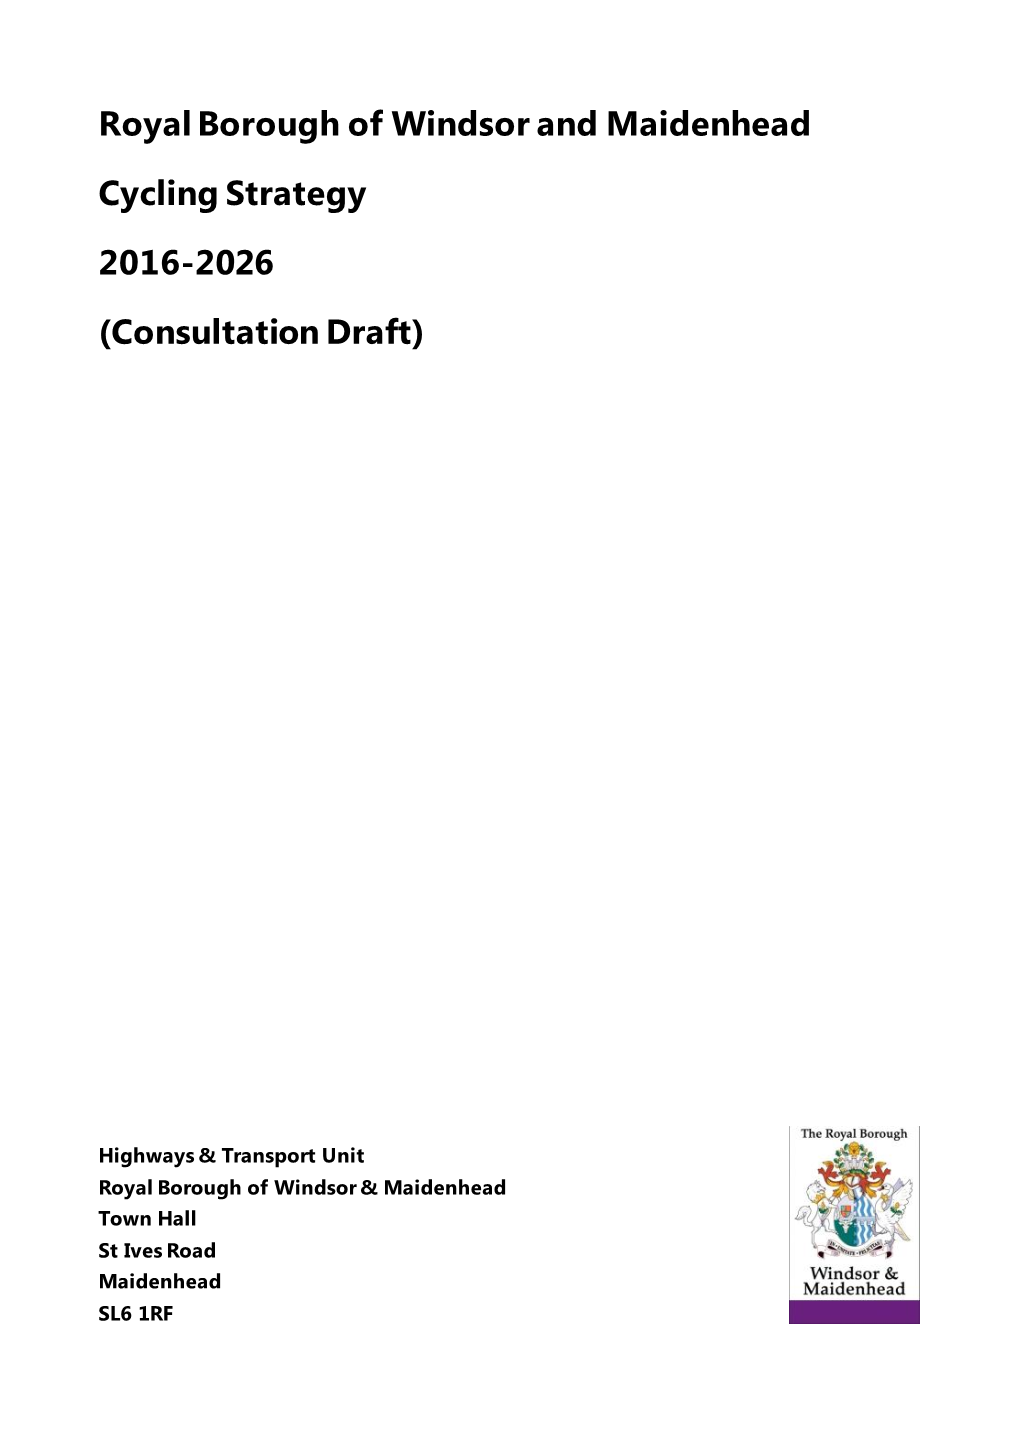 Royal Borough of Windsor and Maidenhead Cycling Strategy 2016